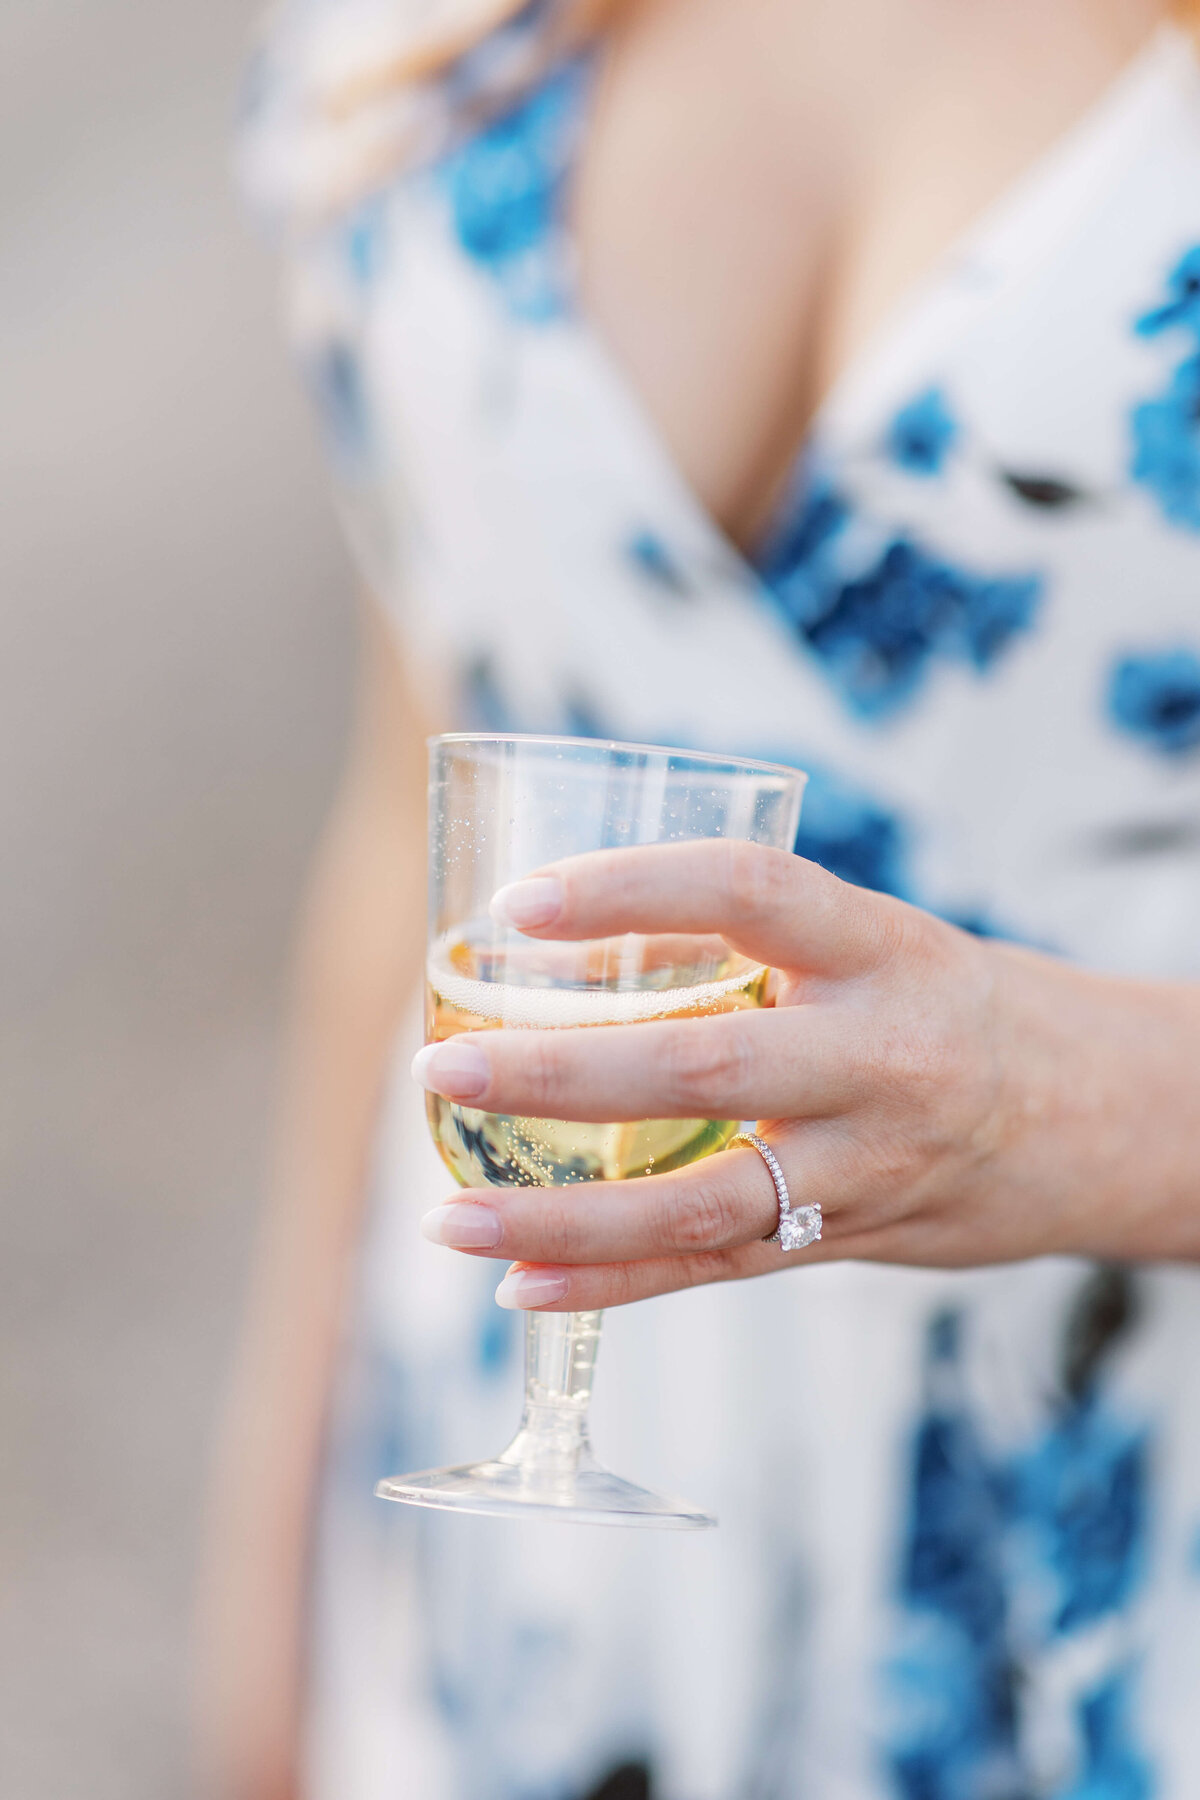 Bride to be displays her engagement ring as she holds a glass of champagne.